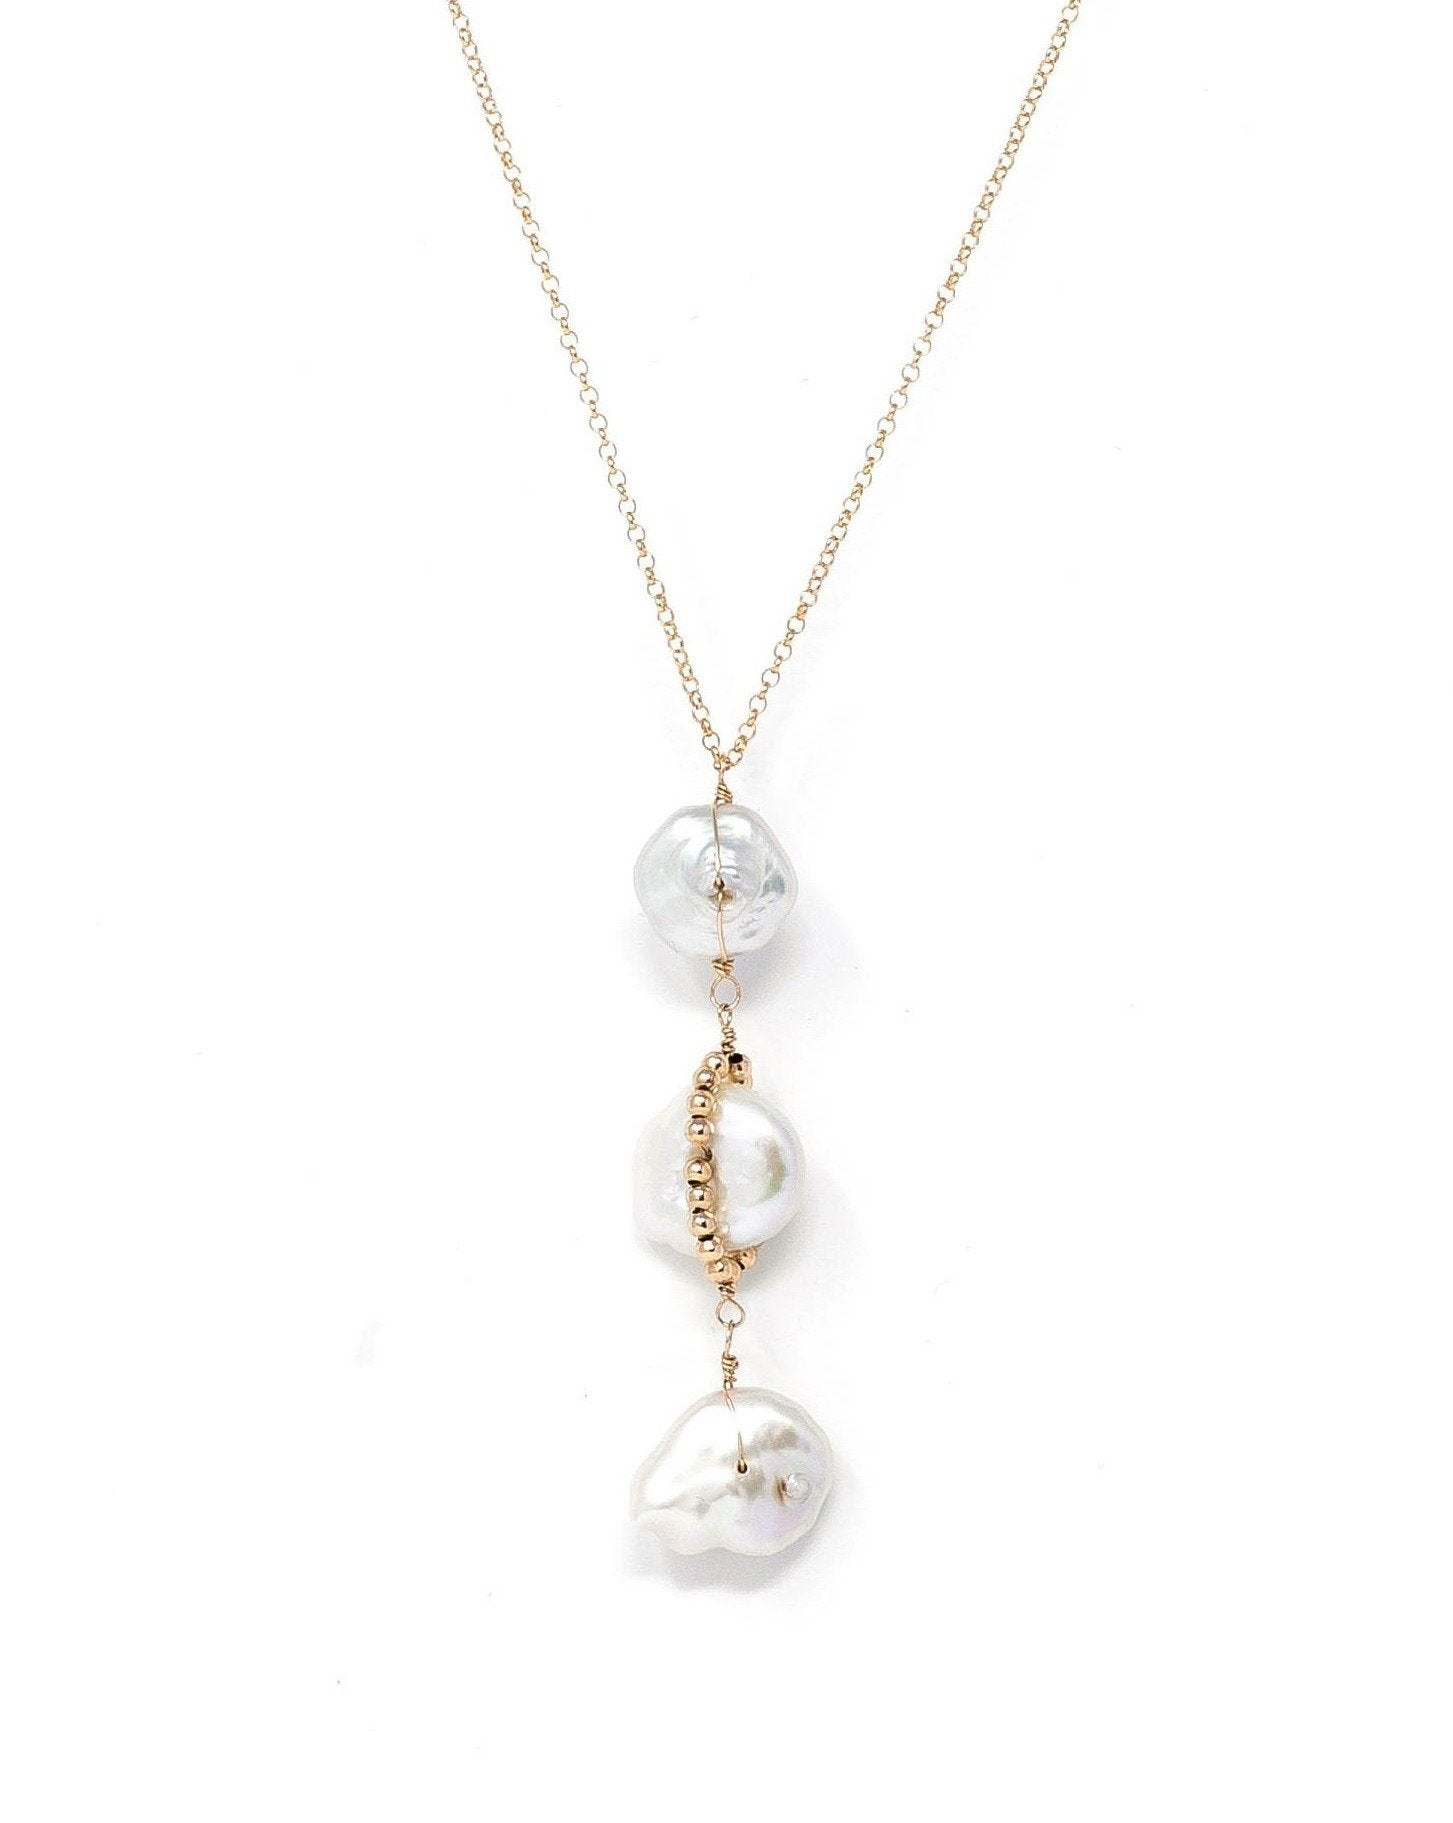 Zaya Necklace by KOZAKH. A 16 to 25 inch adjustable length necklace, crafted in 14K Gold Filled, featuring White Keshi Pearls and 2mm Seamless beads.